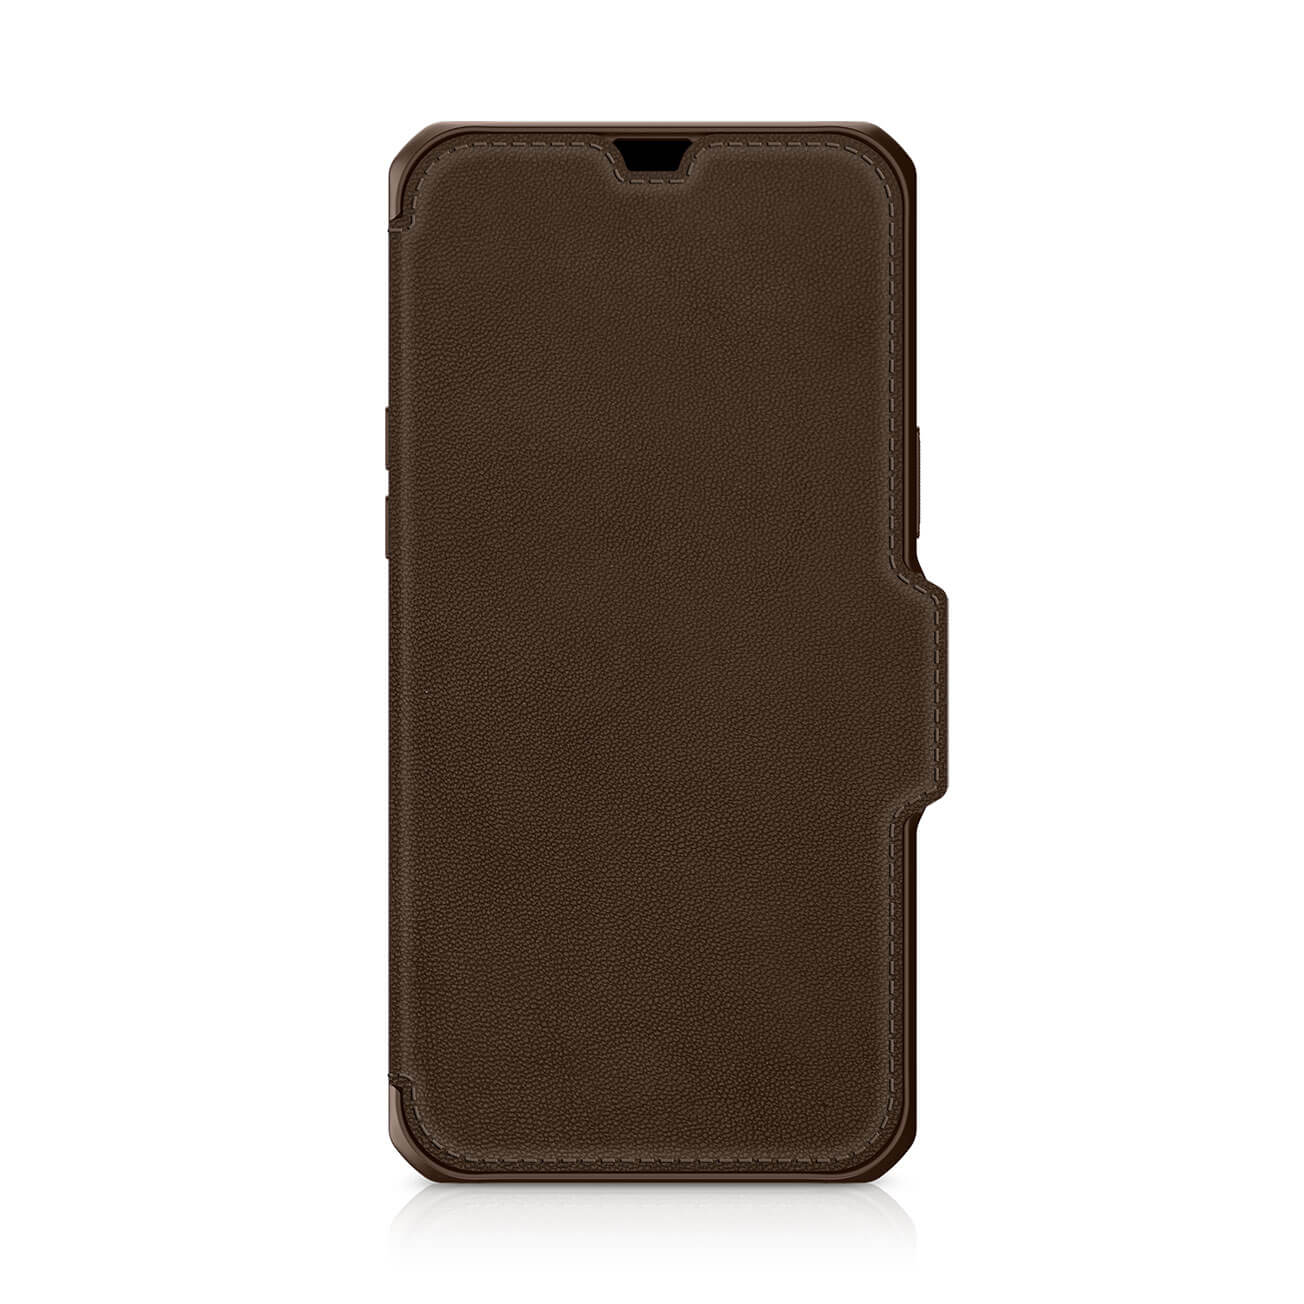 ITSKINS - Hybrid Folio Leather for iPhone 13 Pro [ Brown with real leather ]